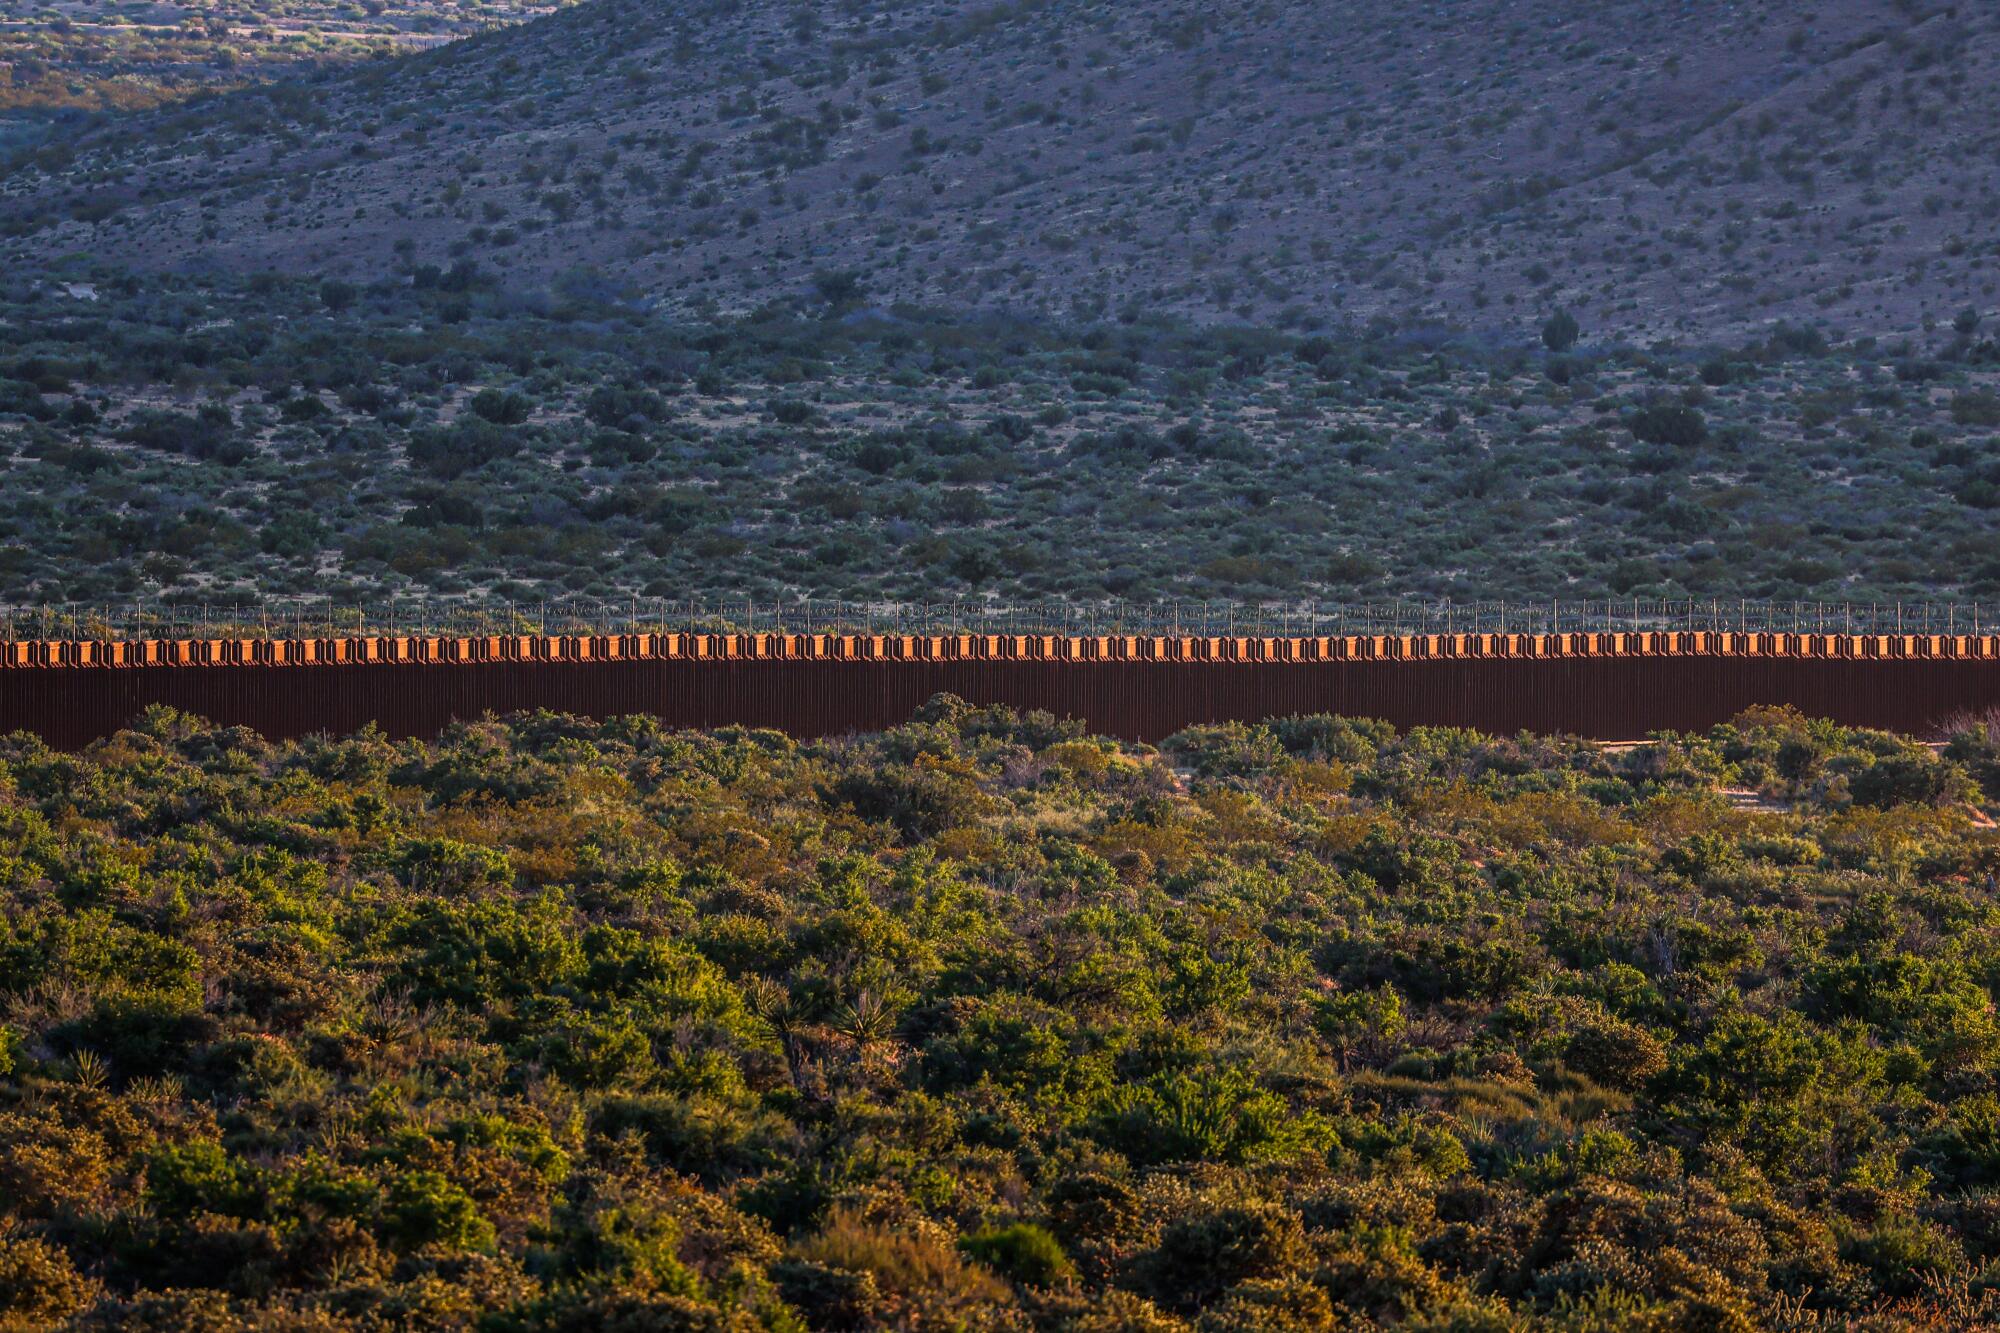 The border wall glows in late afternoon sunlight